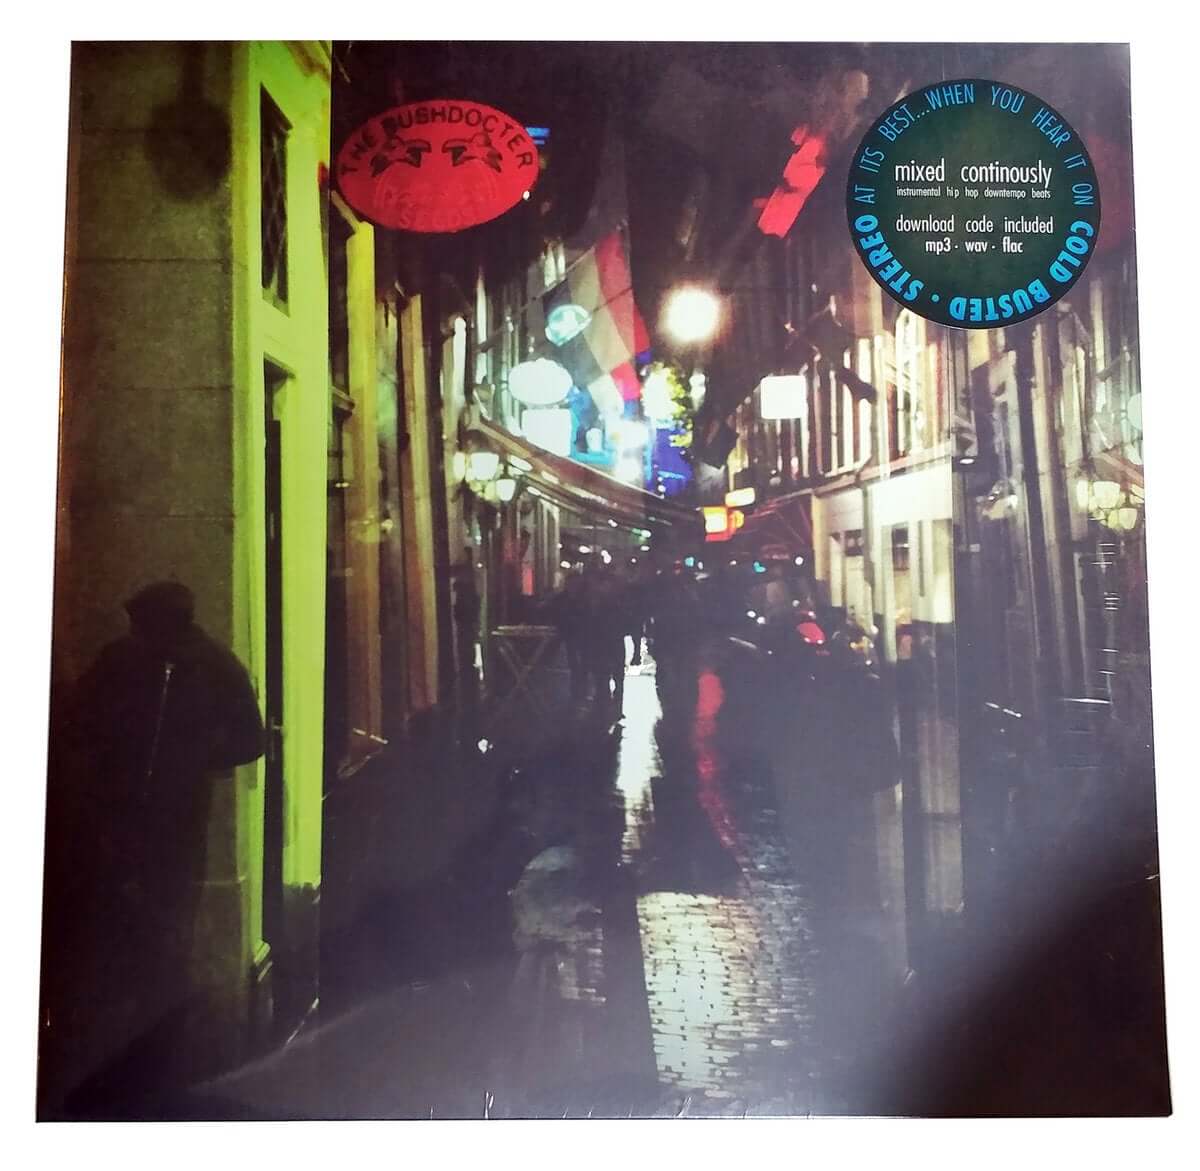 Zak Damundo - 3am - Limited Edition 12 Inch Vinyl Continuously Mixed - Cold Busted